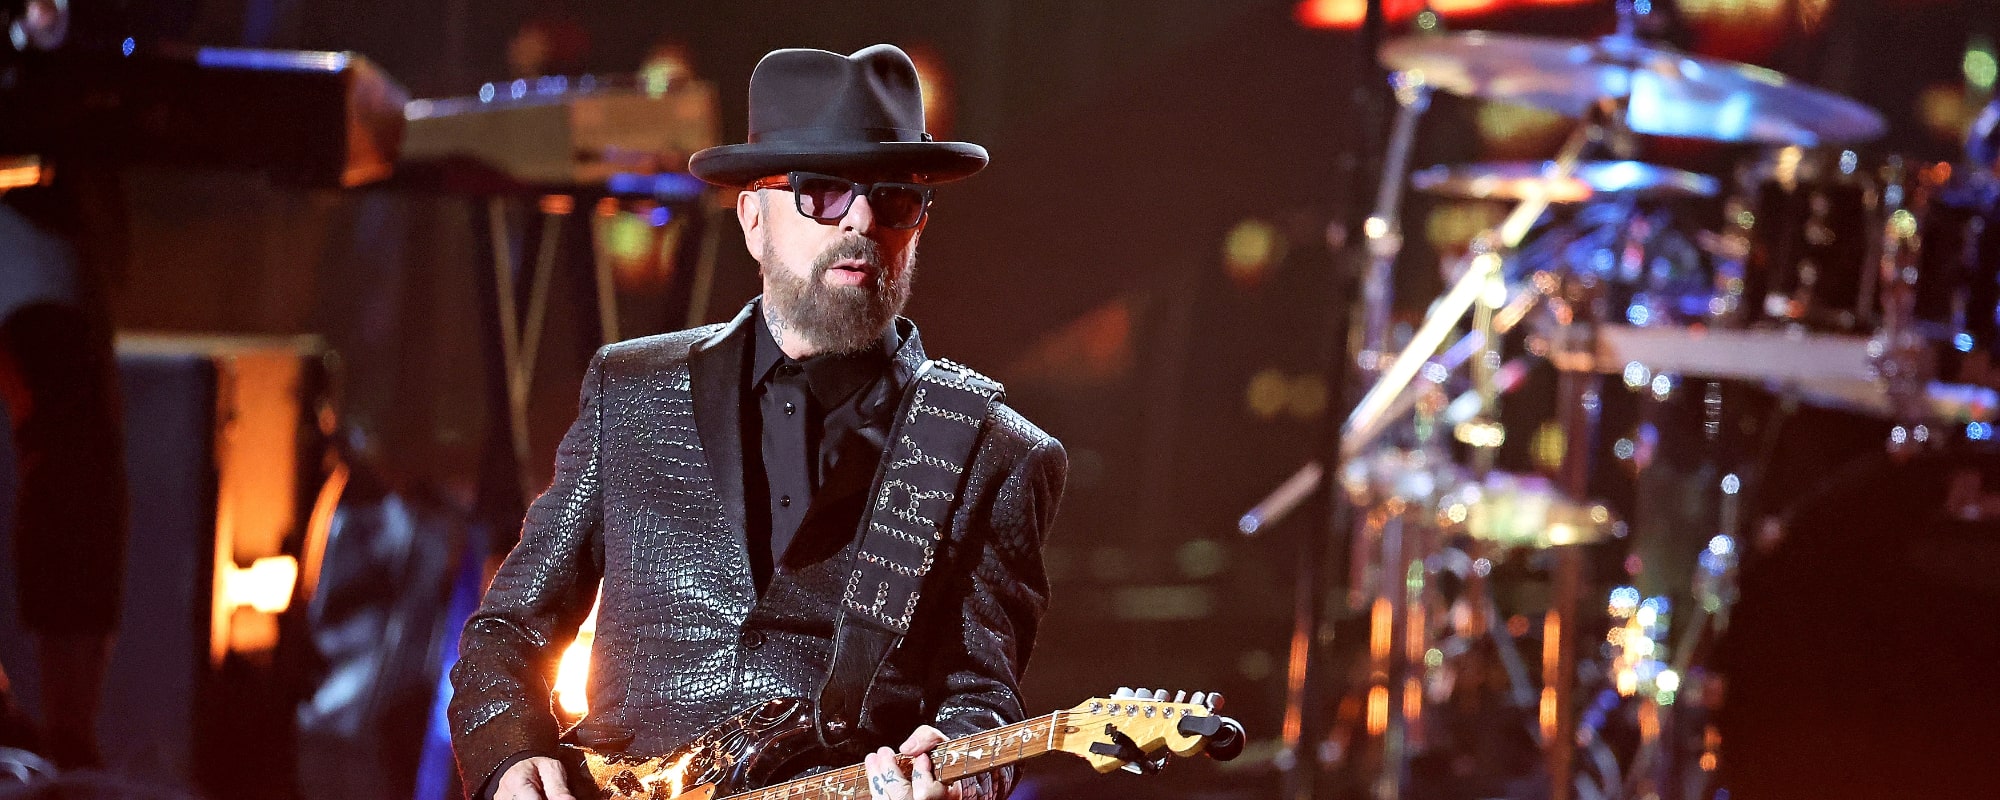 Eurythmics Co-Founder Dave Stewart Introduces His New Group The Time Experience Project with Debut Single “Brings Me Home”